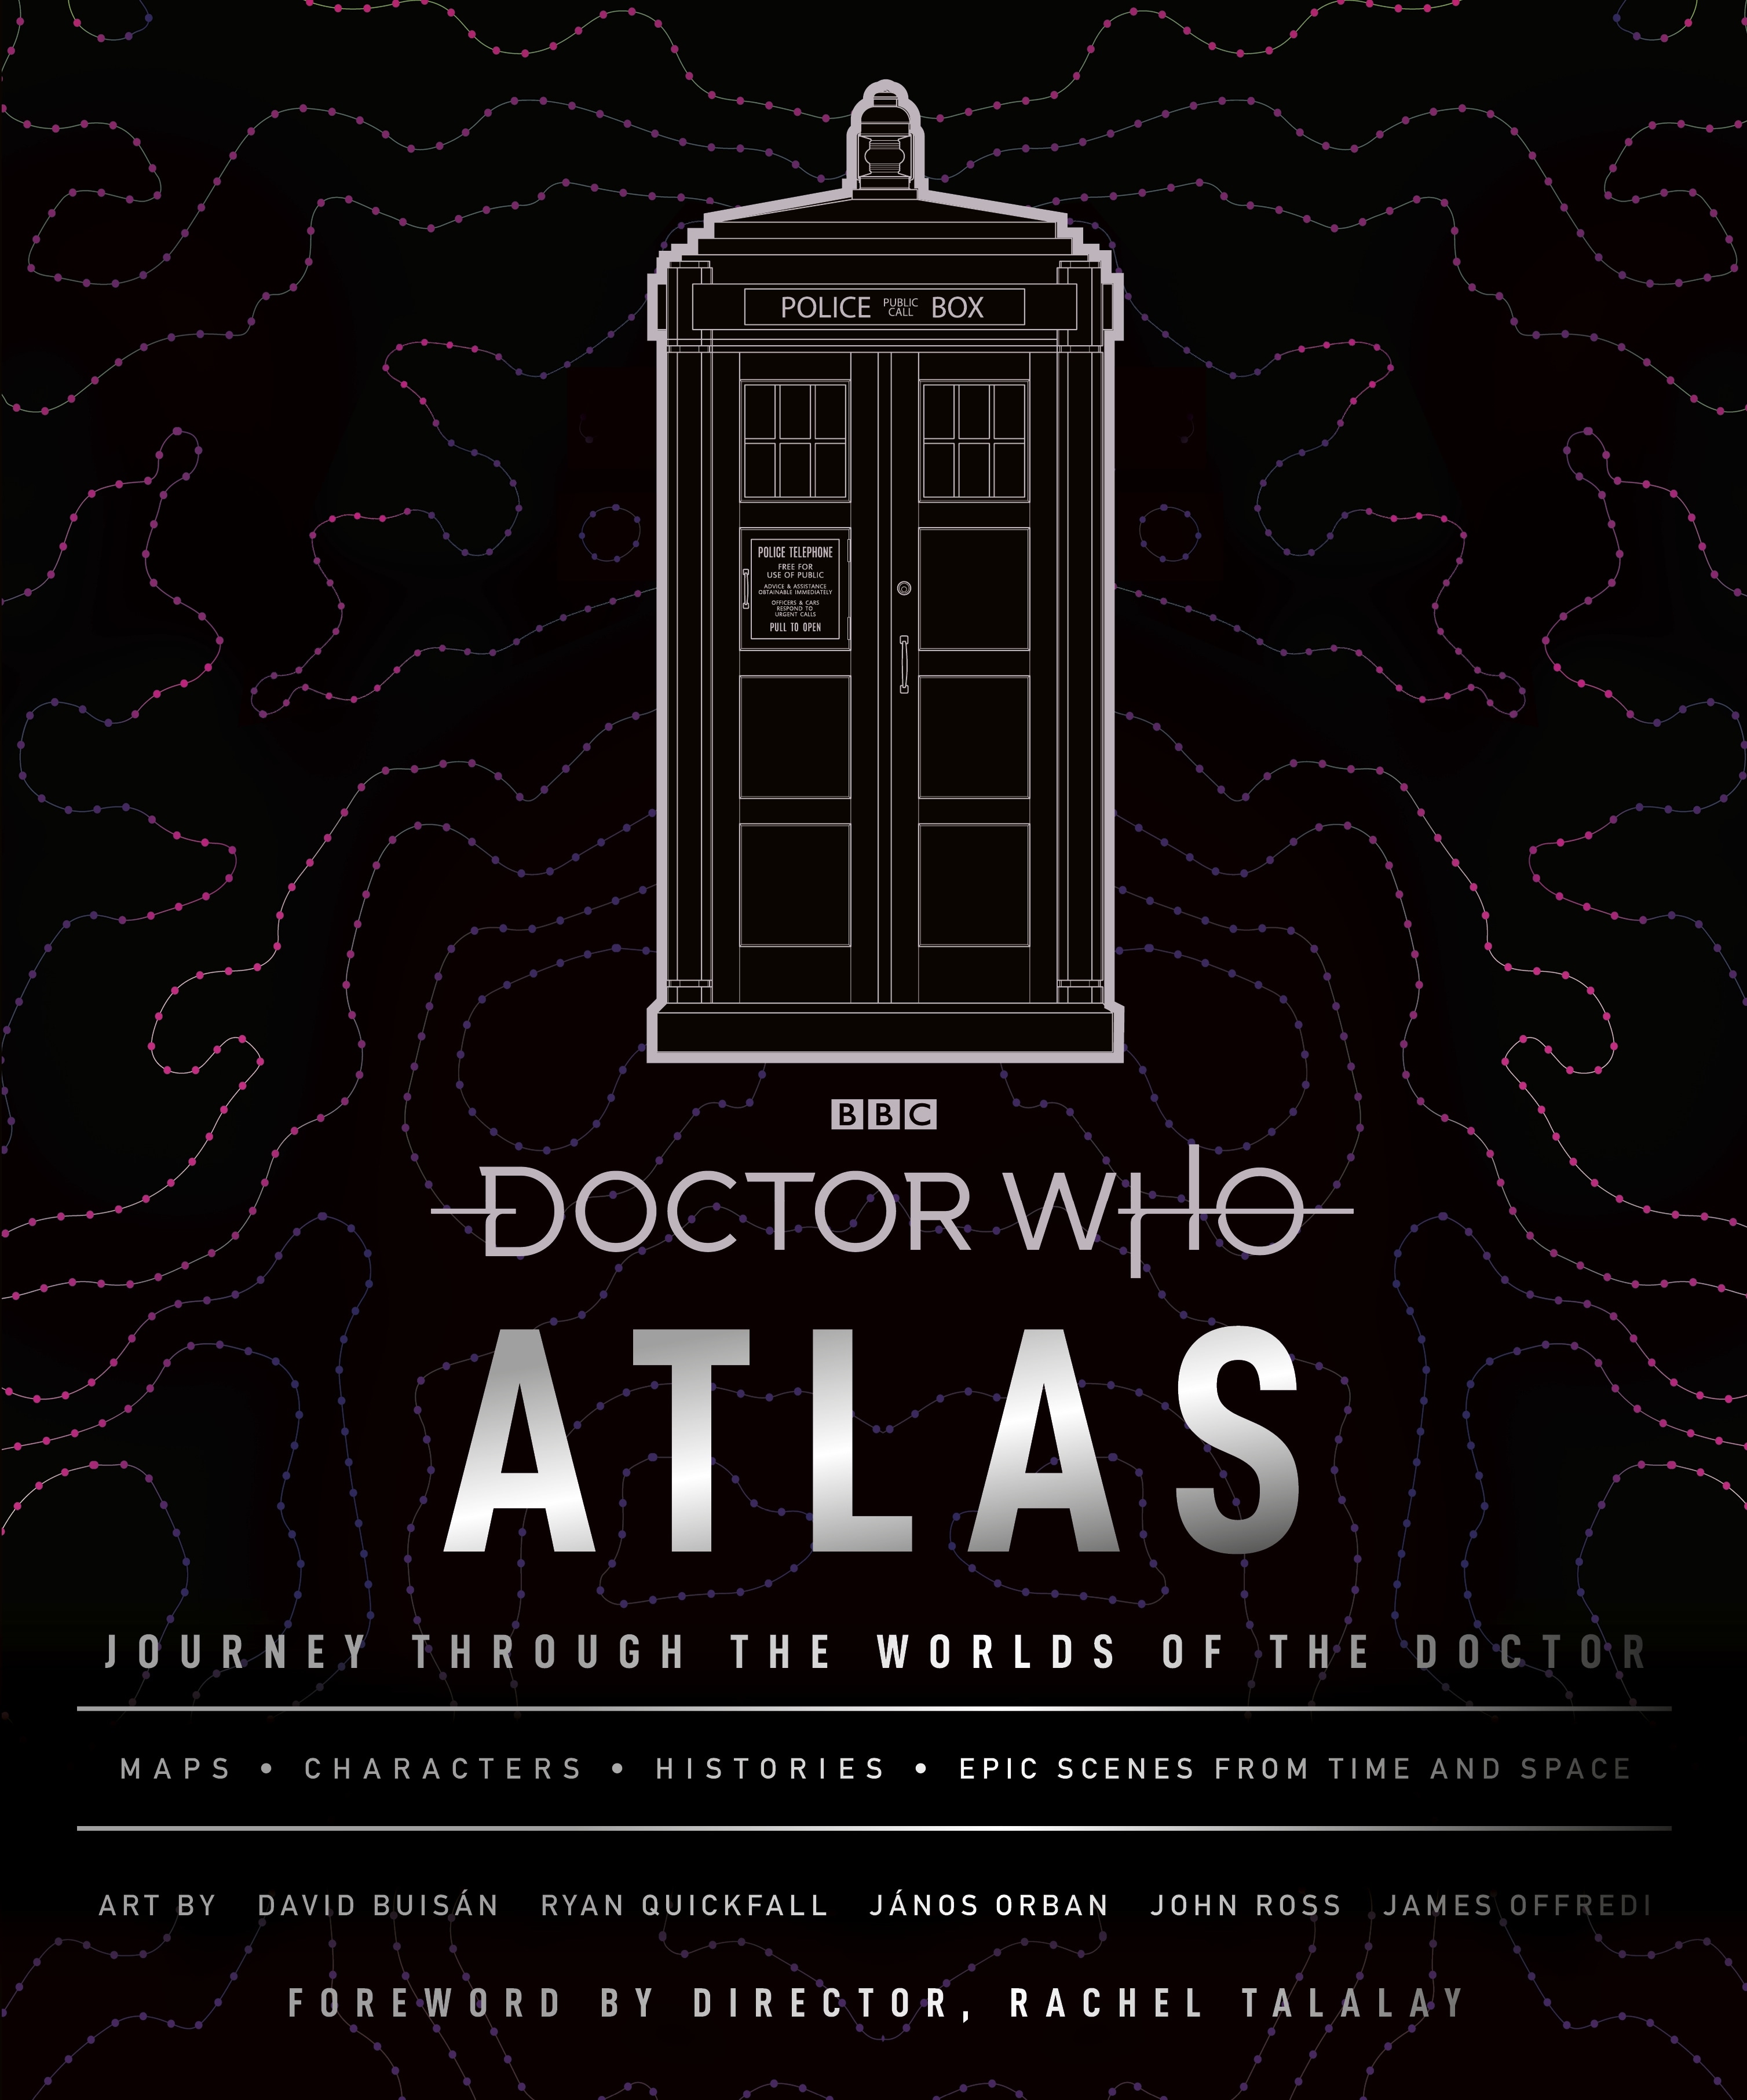 Book “Doctor Who Atlas” by Doctor Who — September 2, 2021